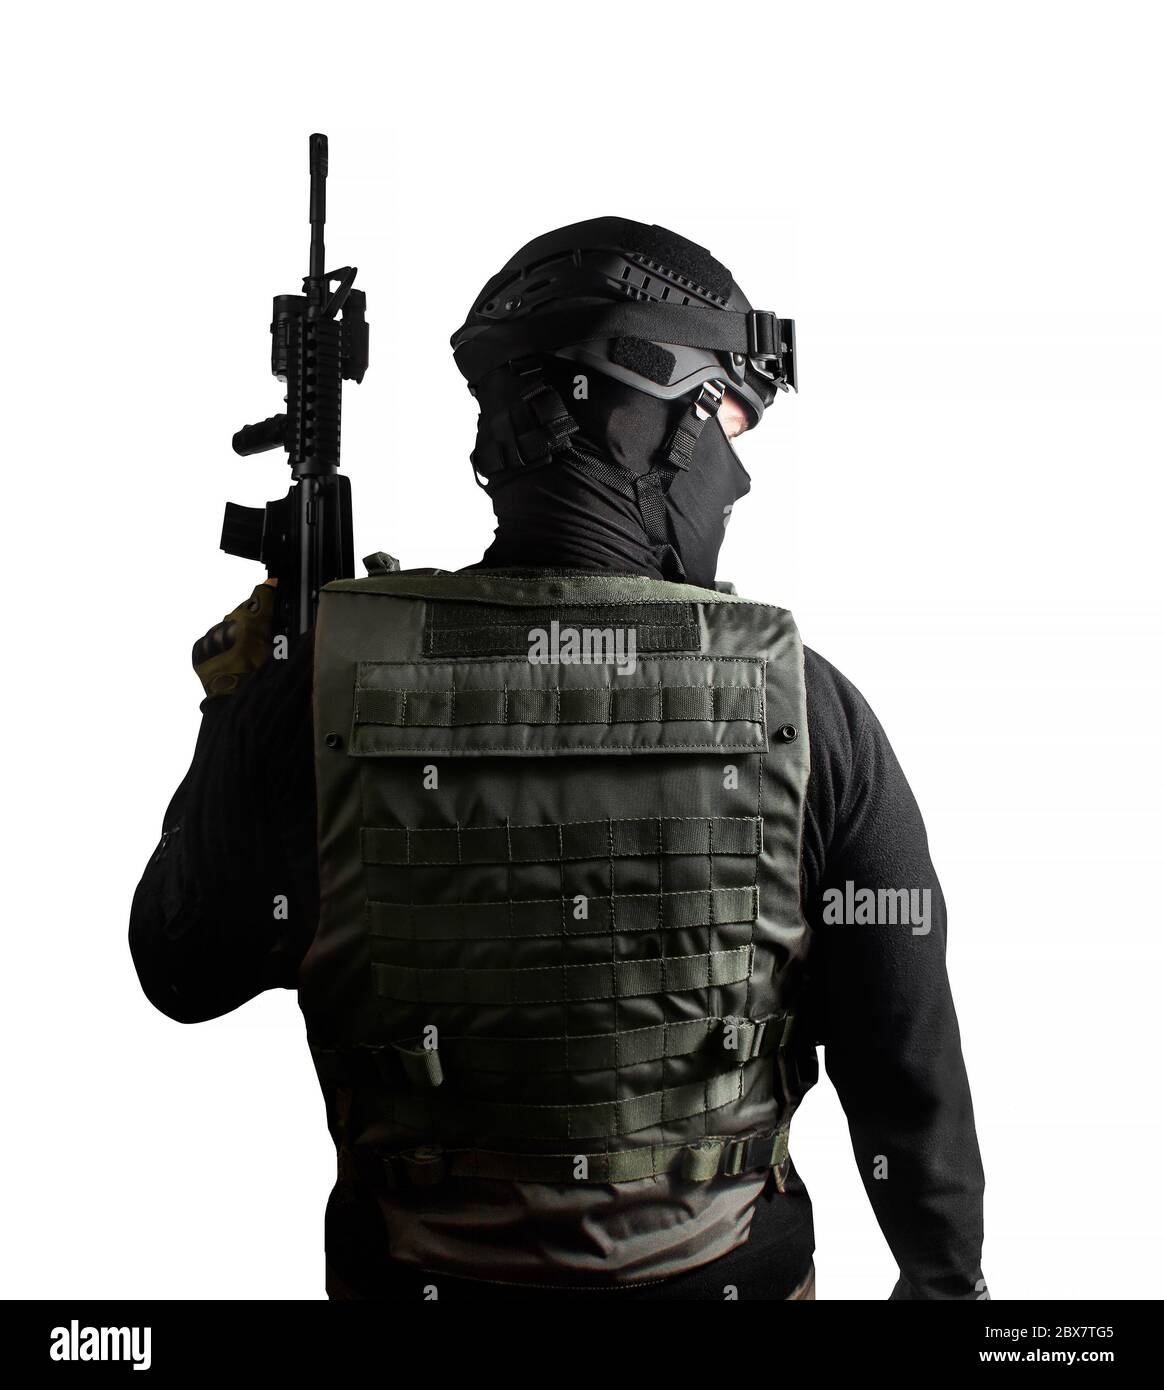 Isolated photo of a fully equipped swat soldier standing with rifle back view pose. Stock Photo